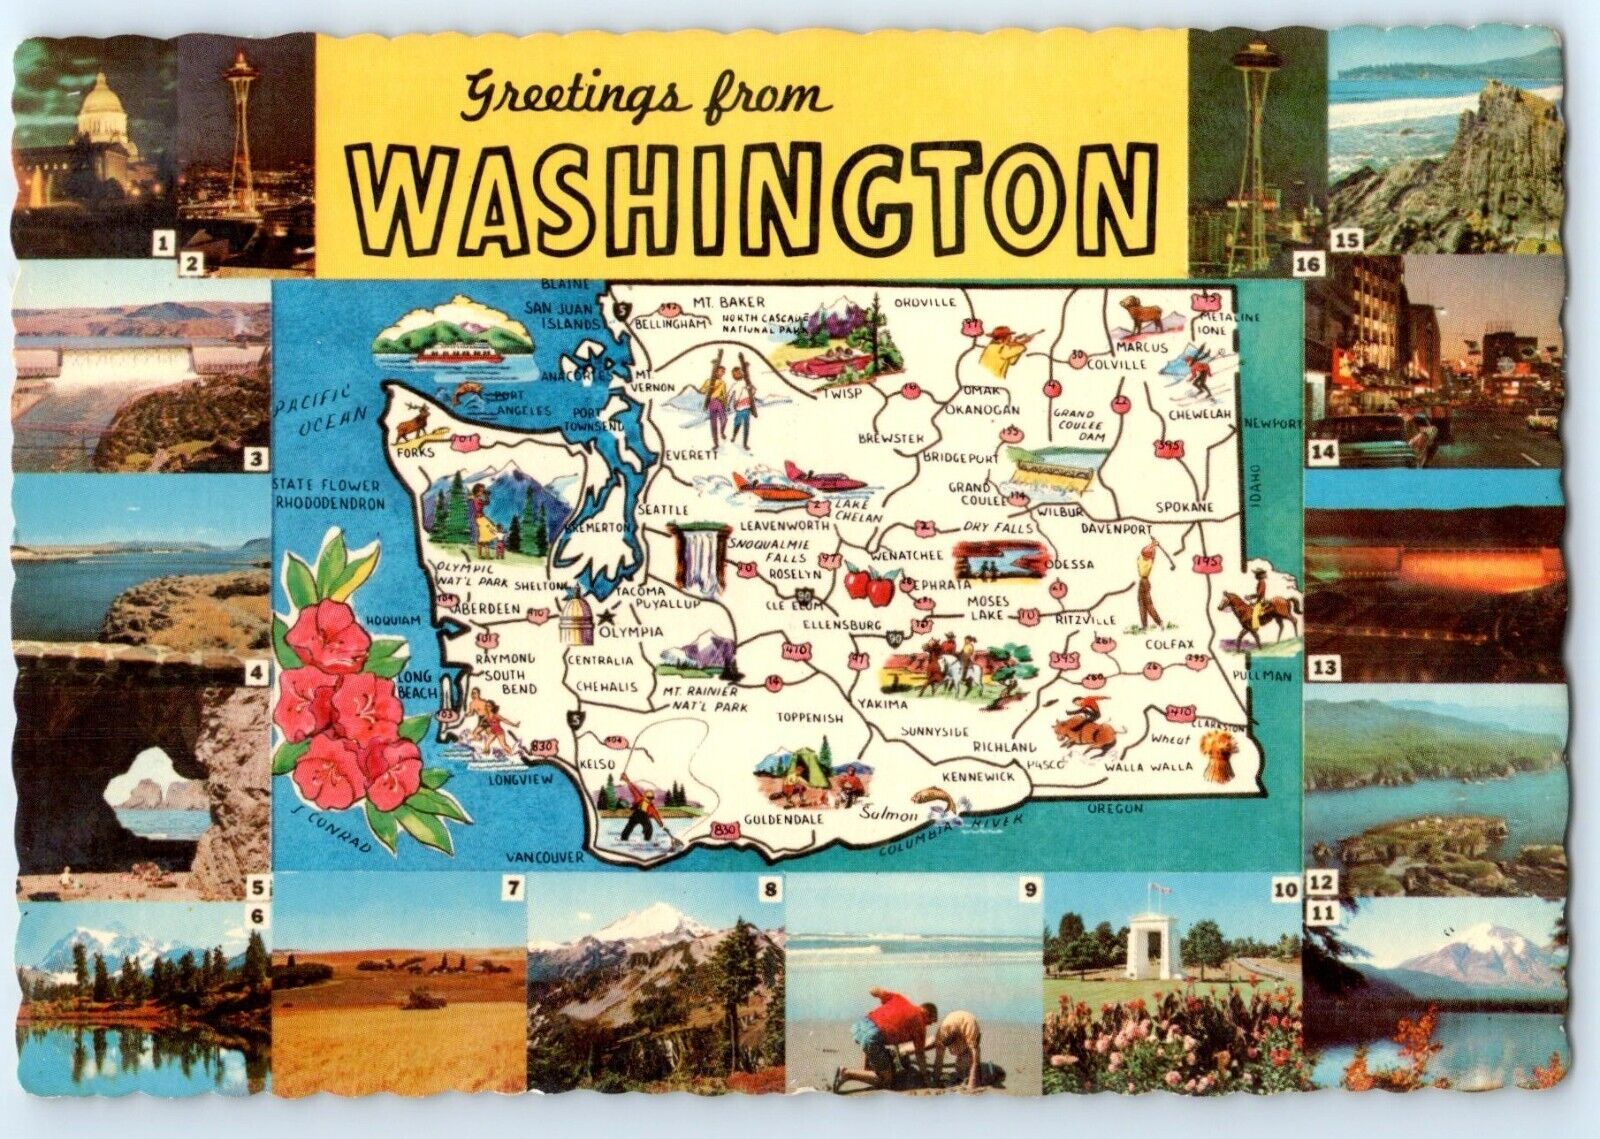 Postcard Greetings from Washington with Map and Multiple Views